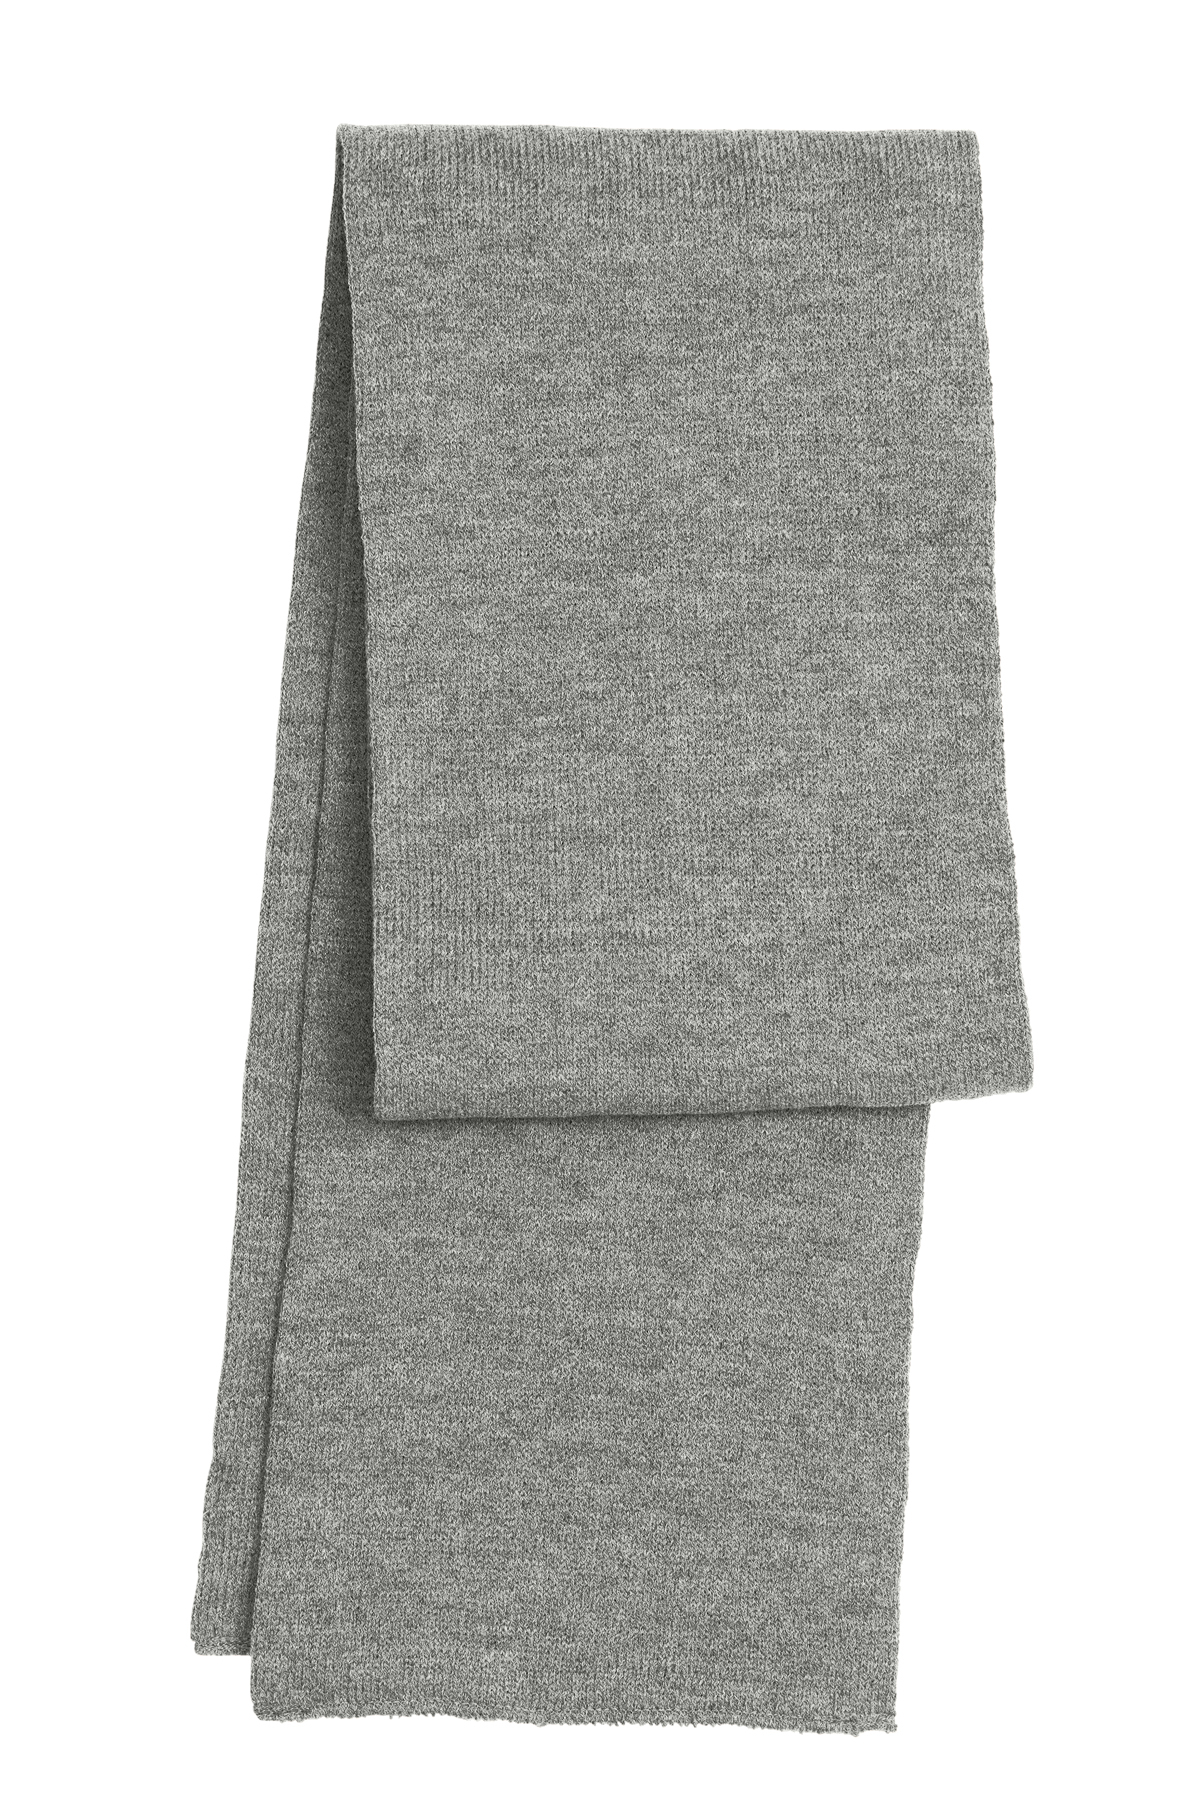 Port & Company - Knitted Scarf | Product | SanMar